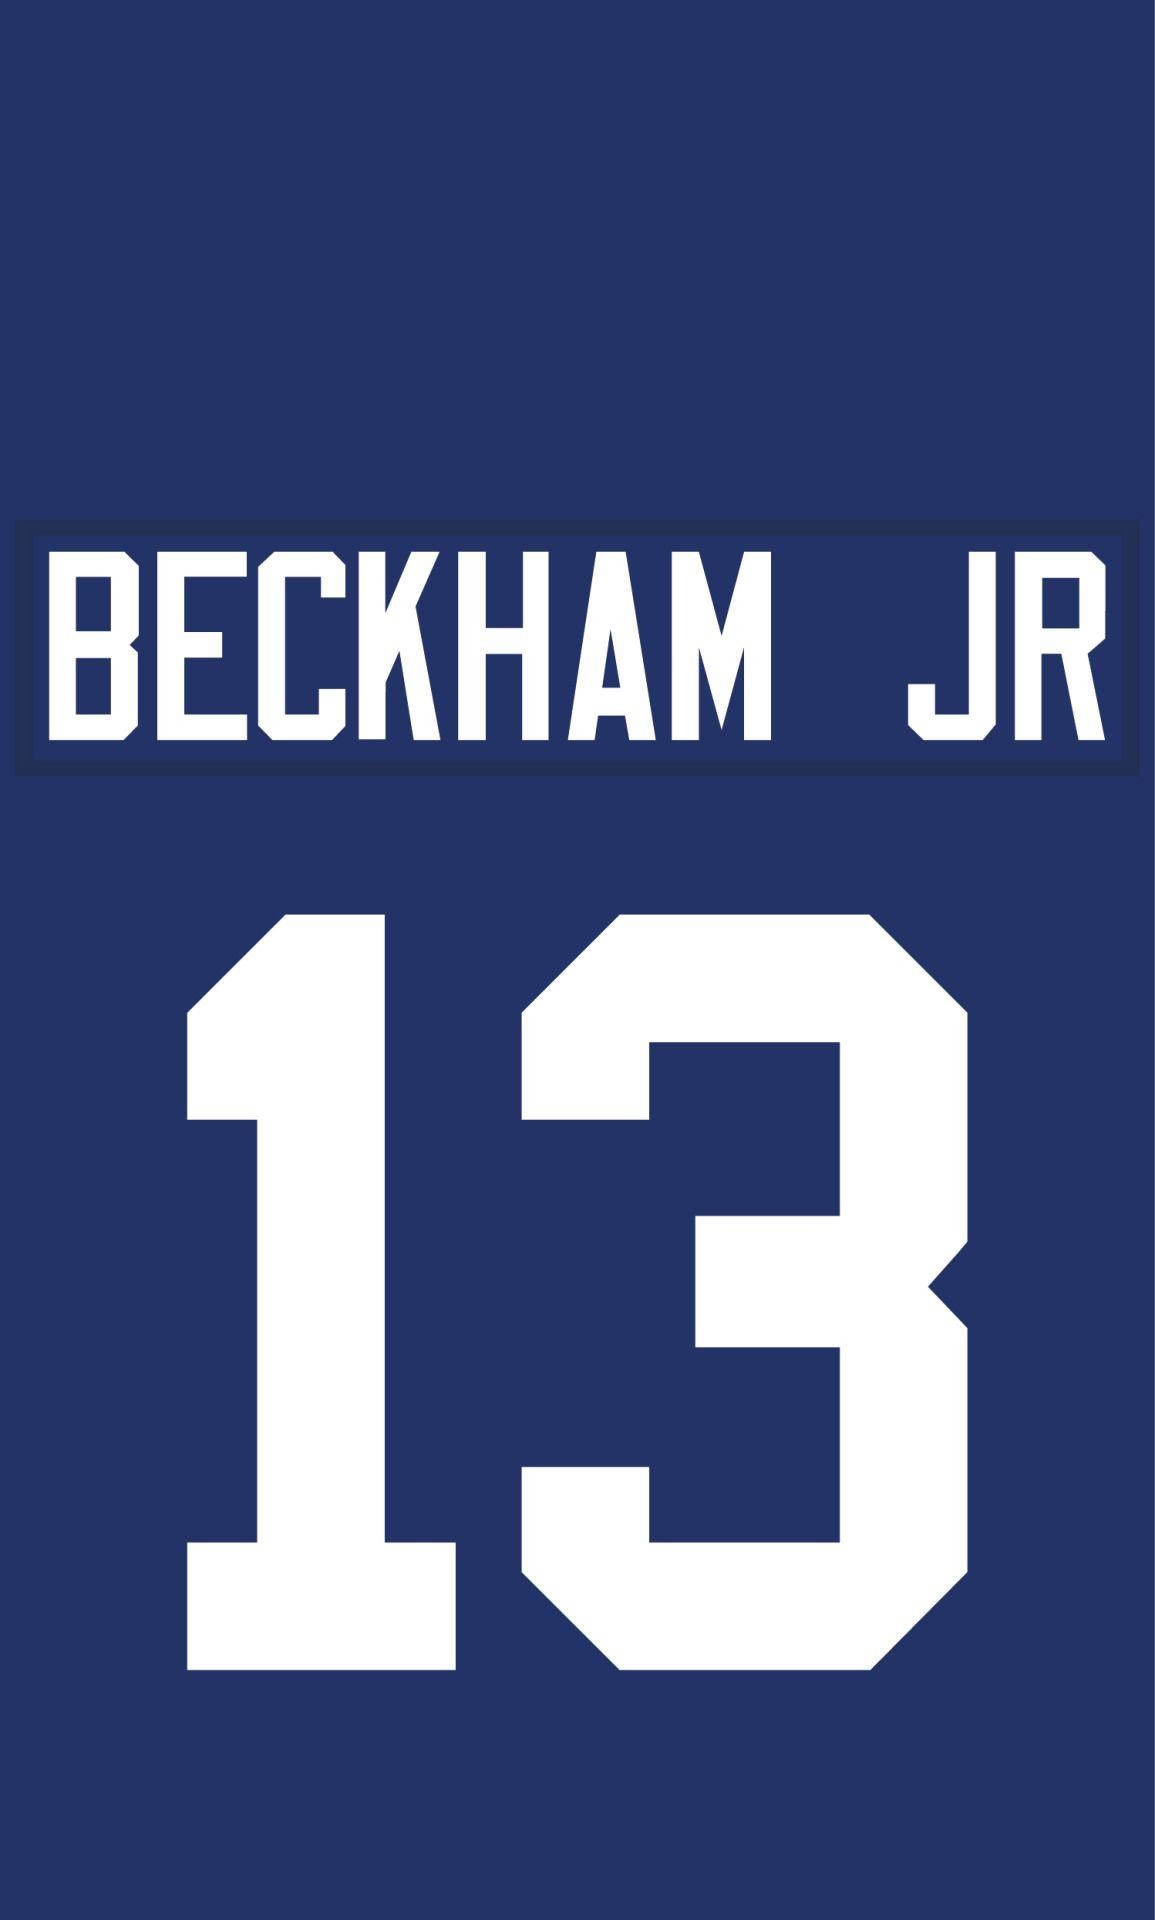 Iphone wallpapers nfl Odell